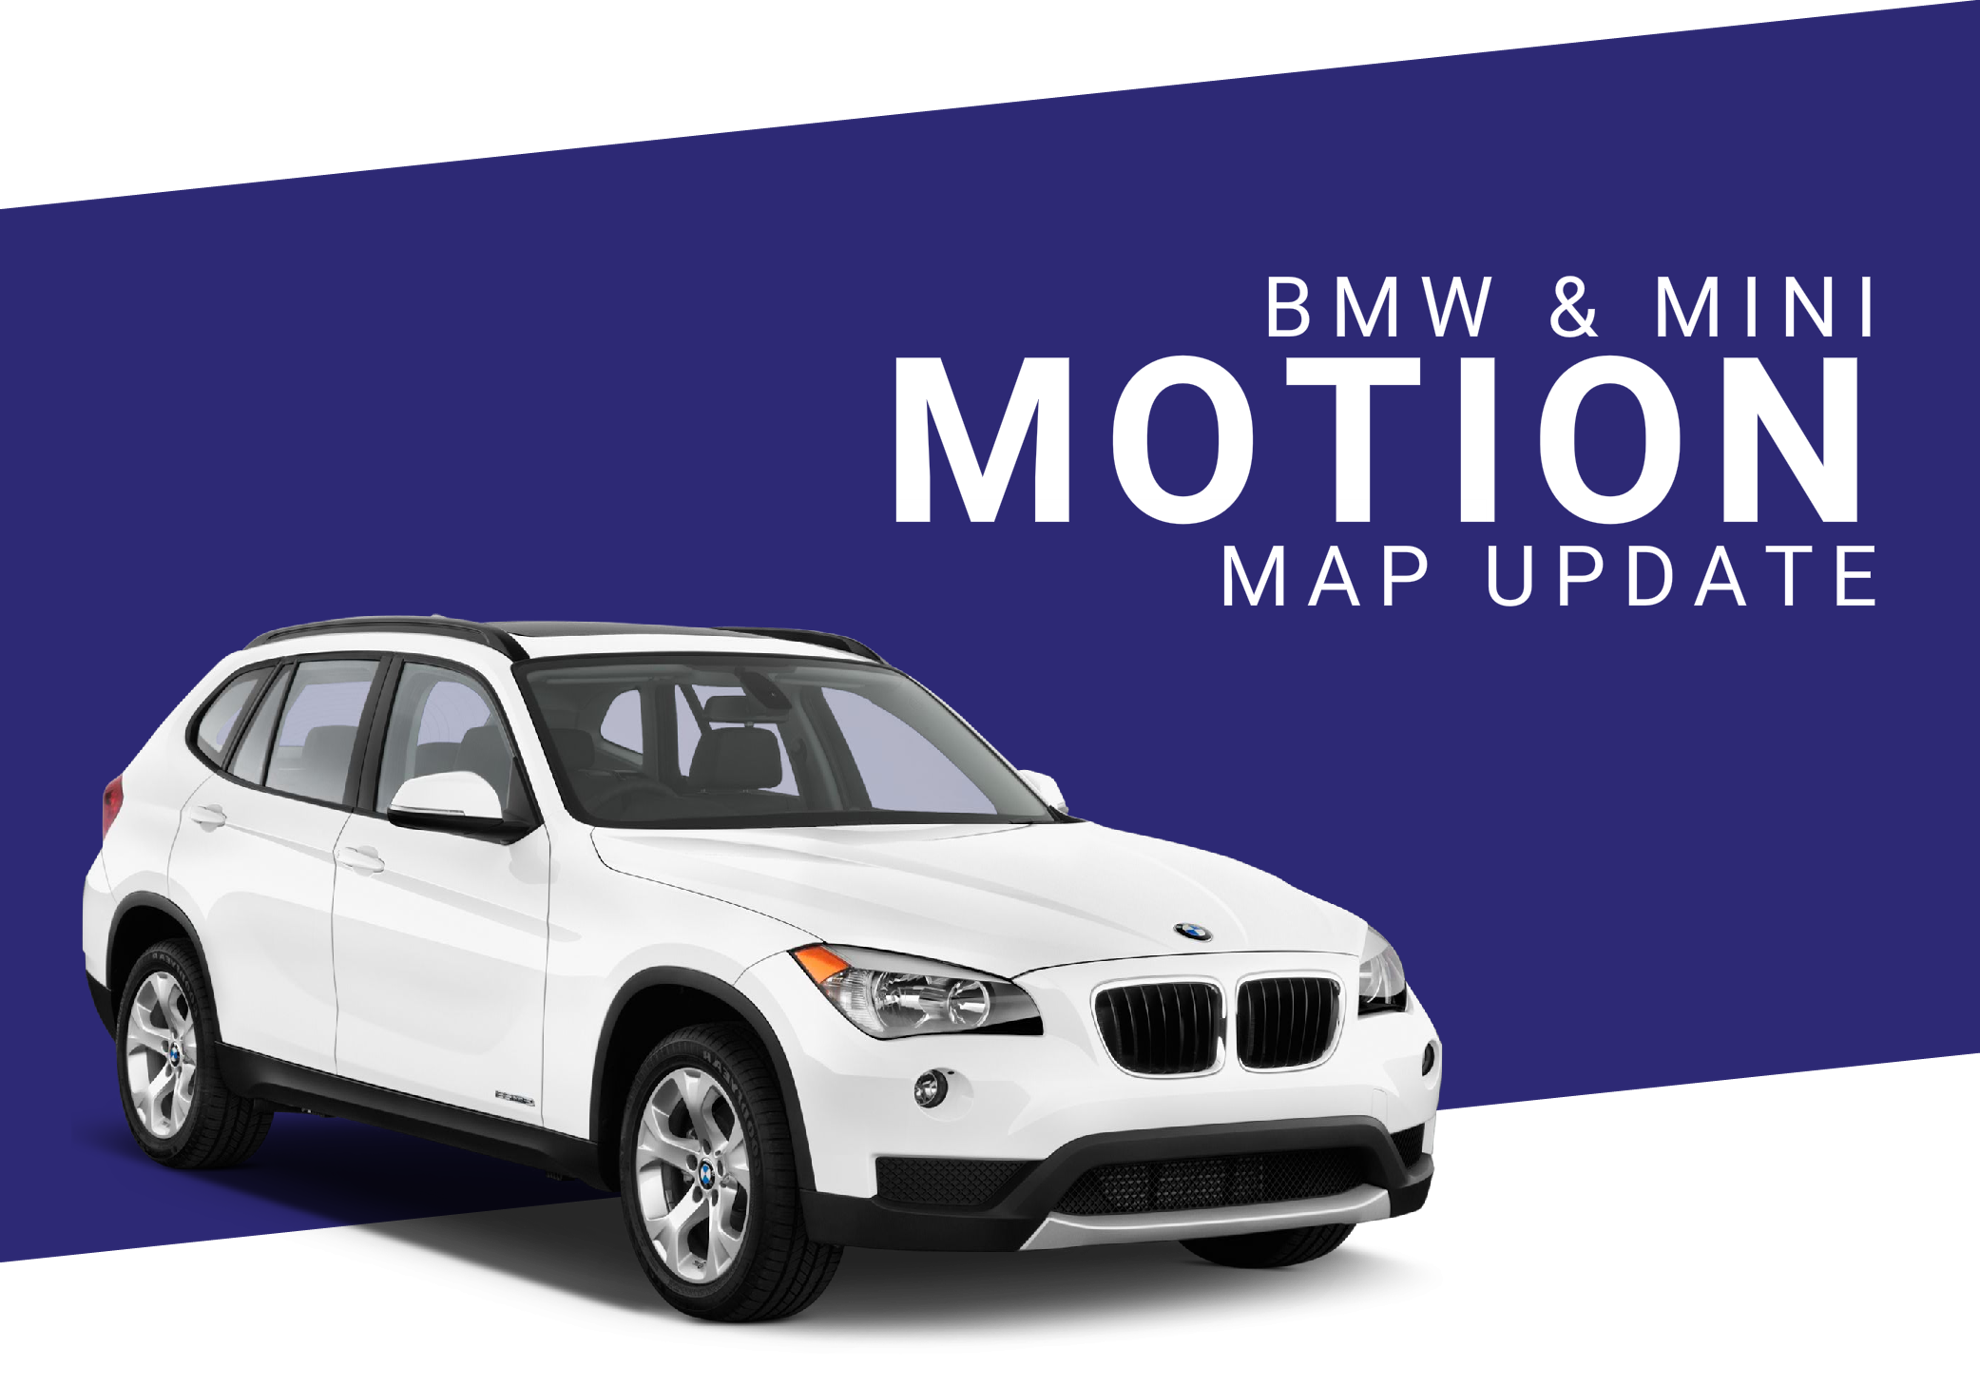 Picture of BMW & MINI NAVIGATION MAP UPDATE - MOTION MAPS